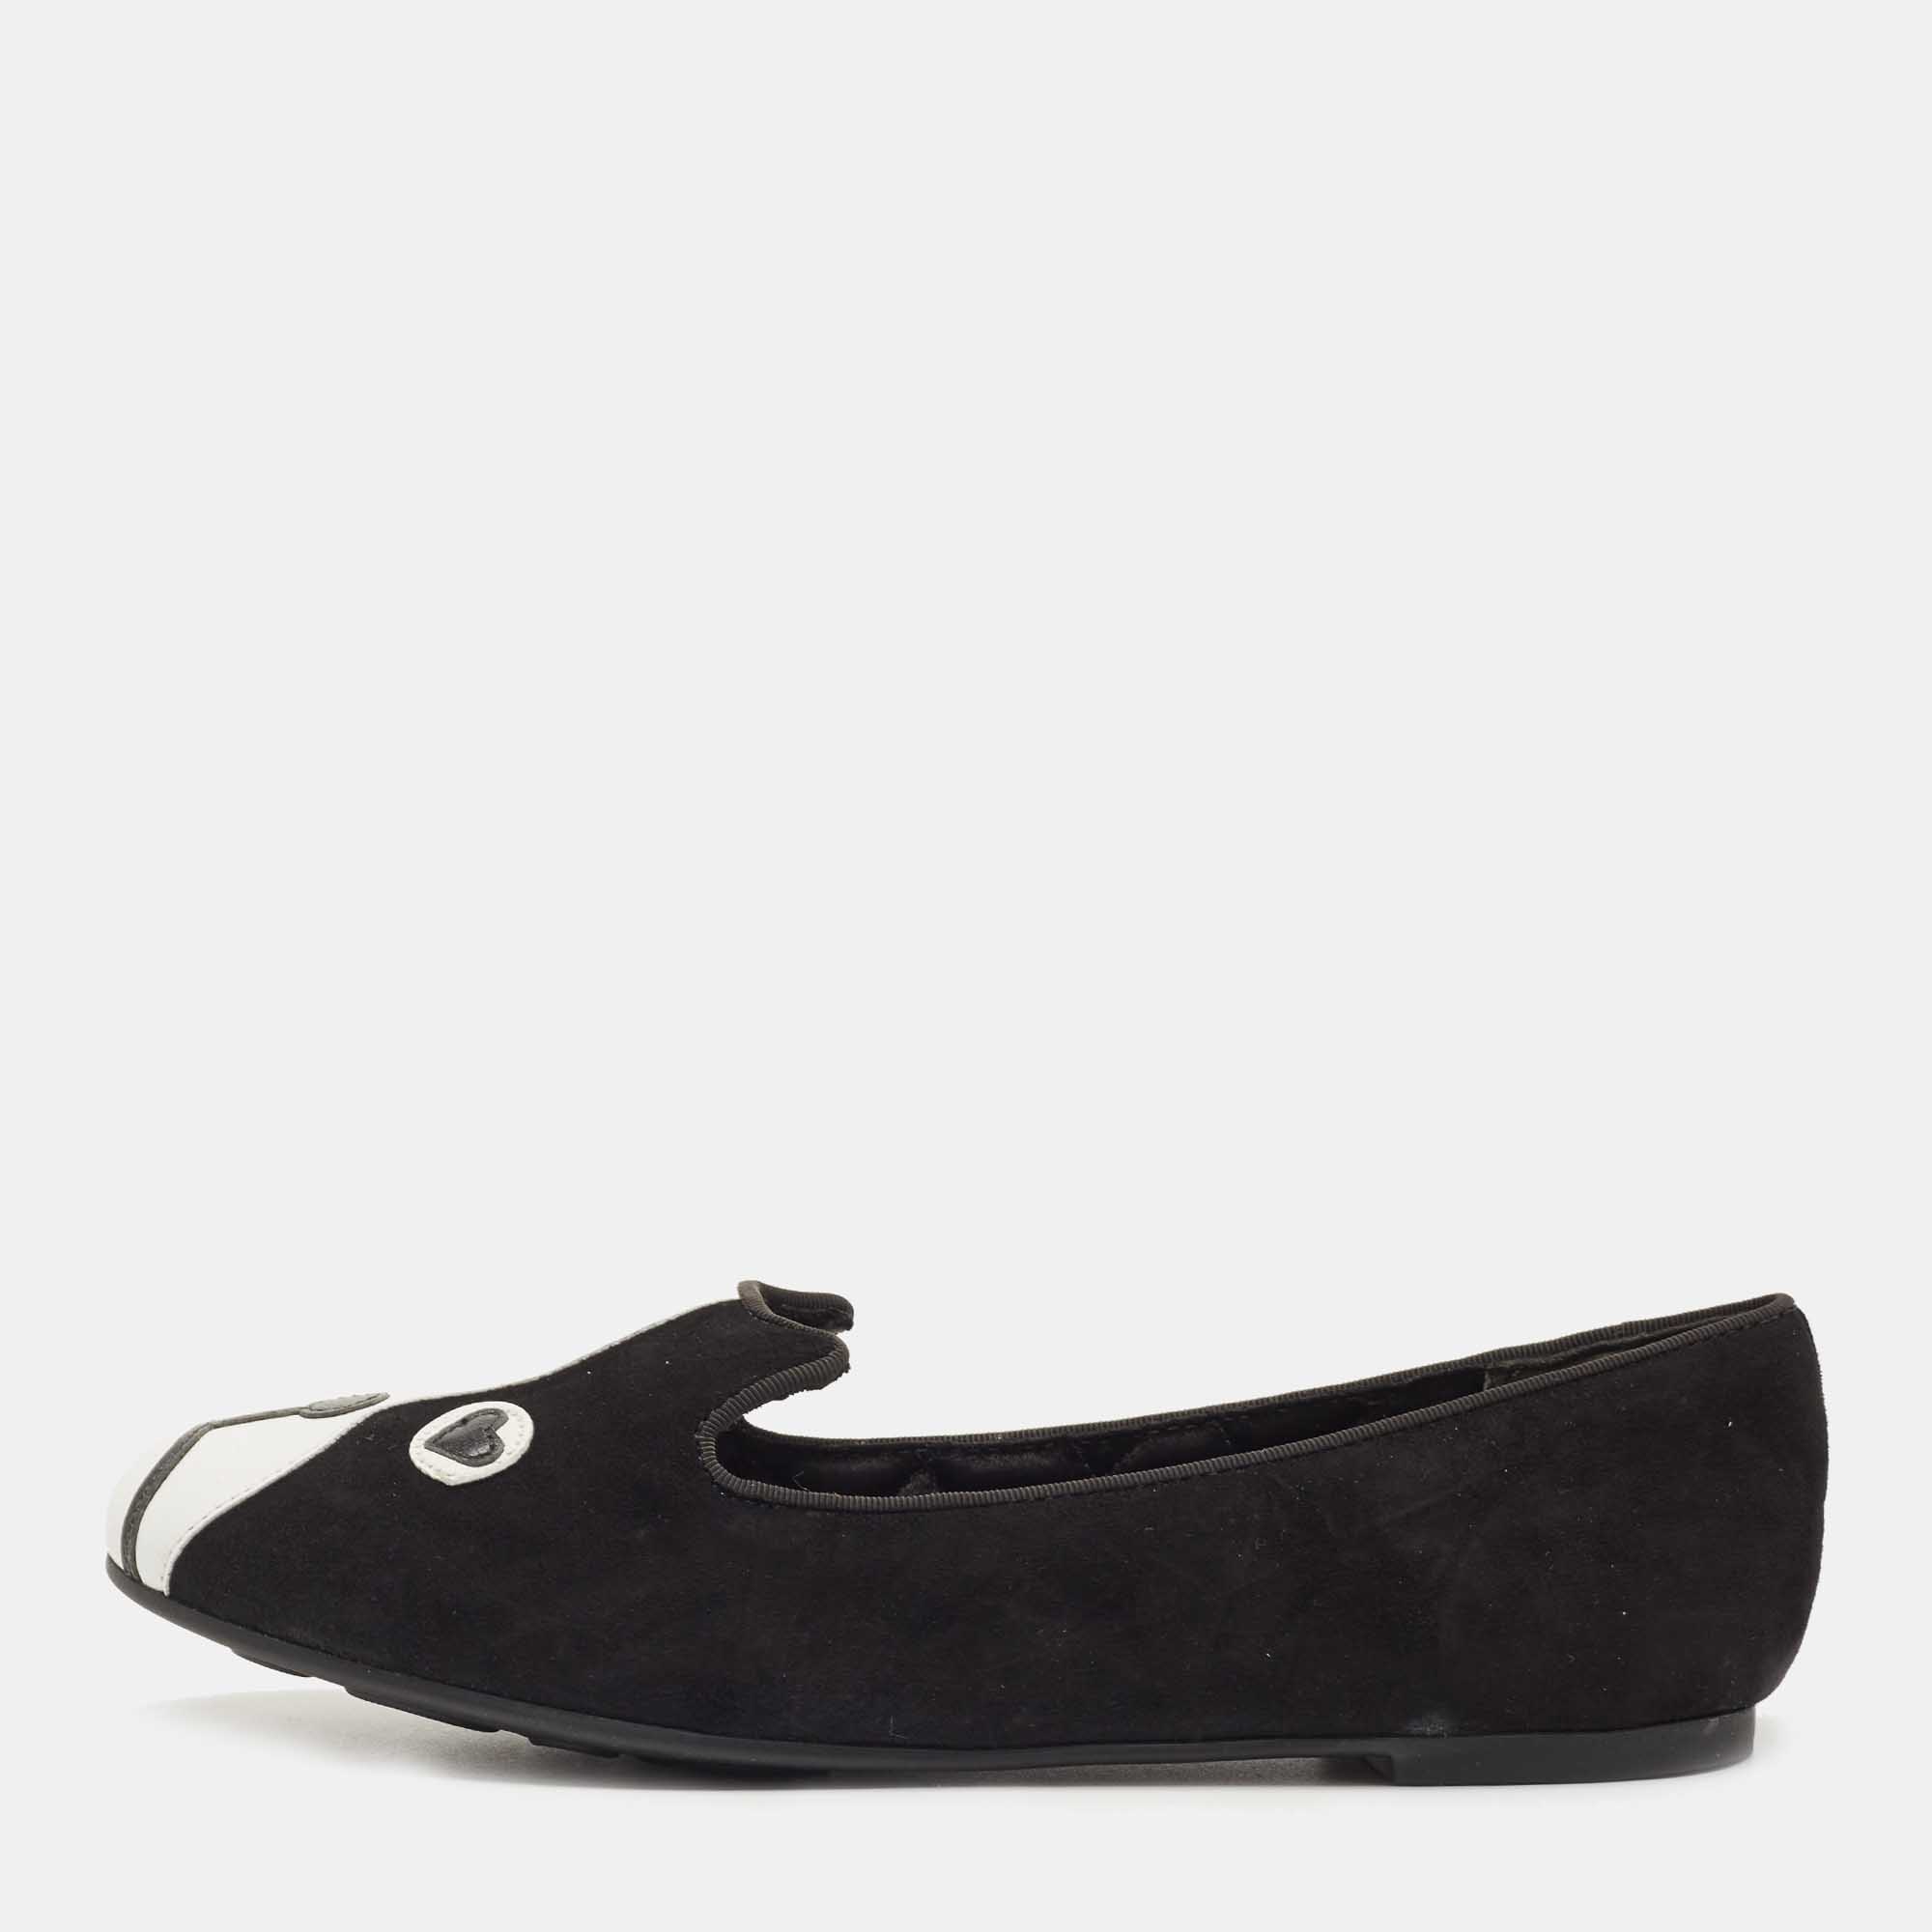 Marc By Marc Jacobs Black/White Suede And Leather Cat Ballet Flats Size 36